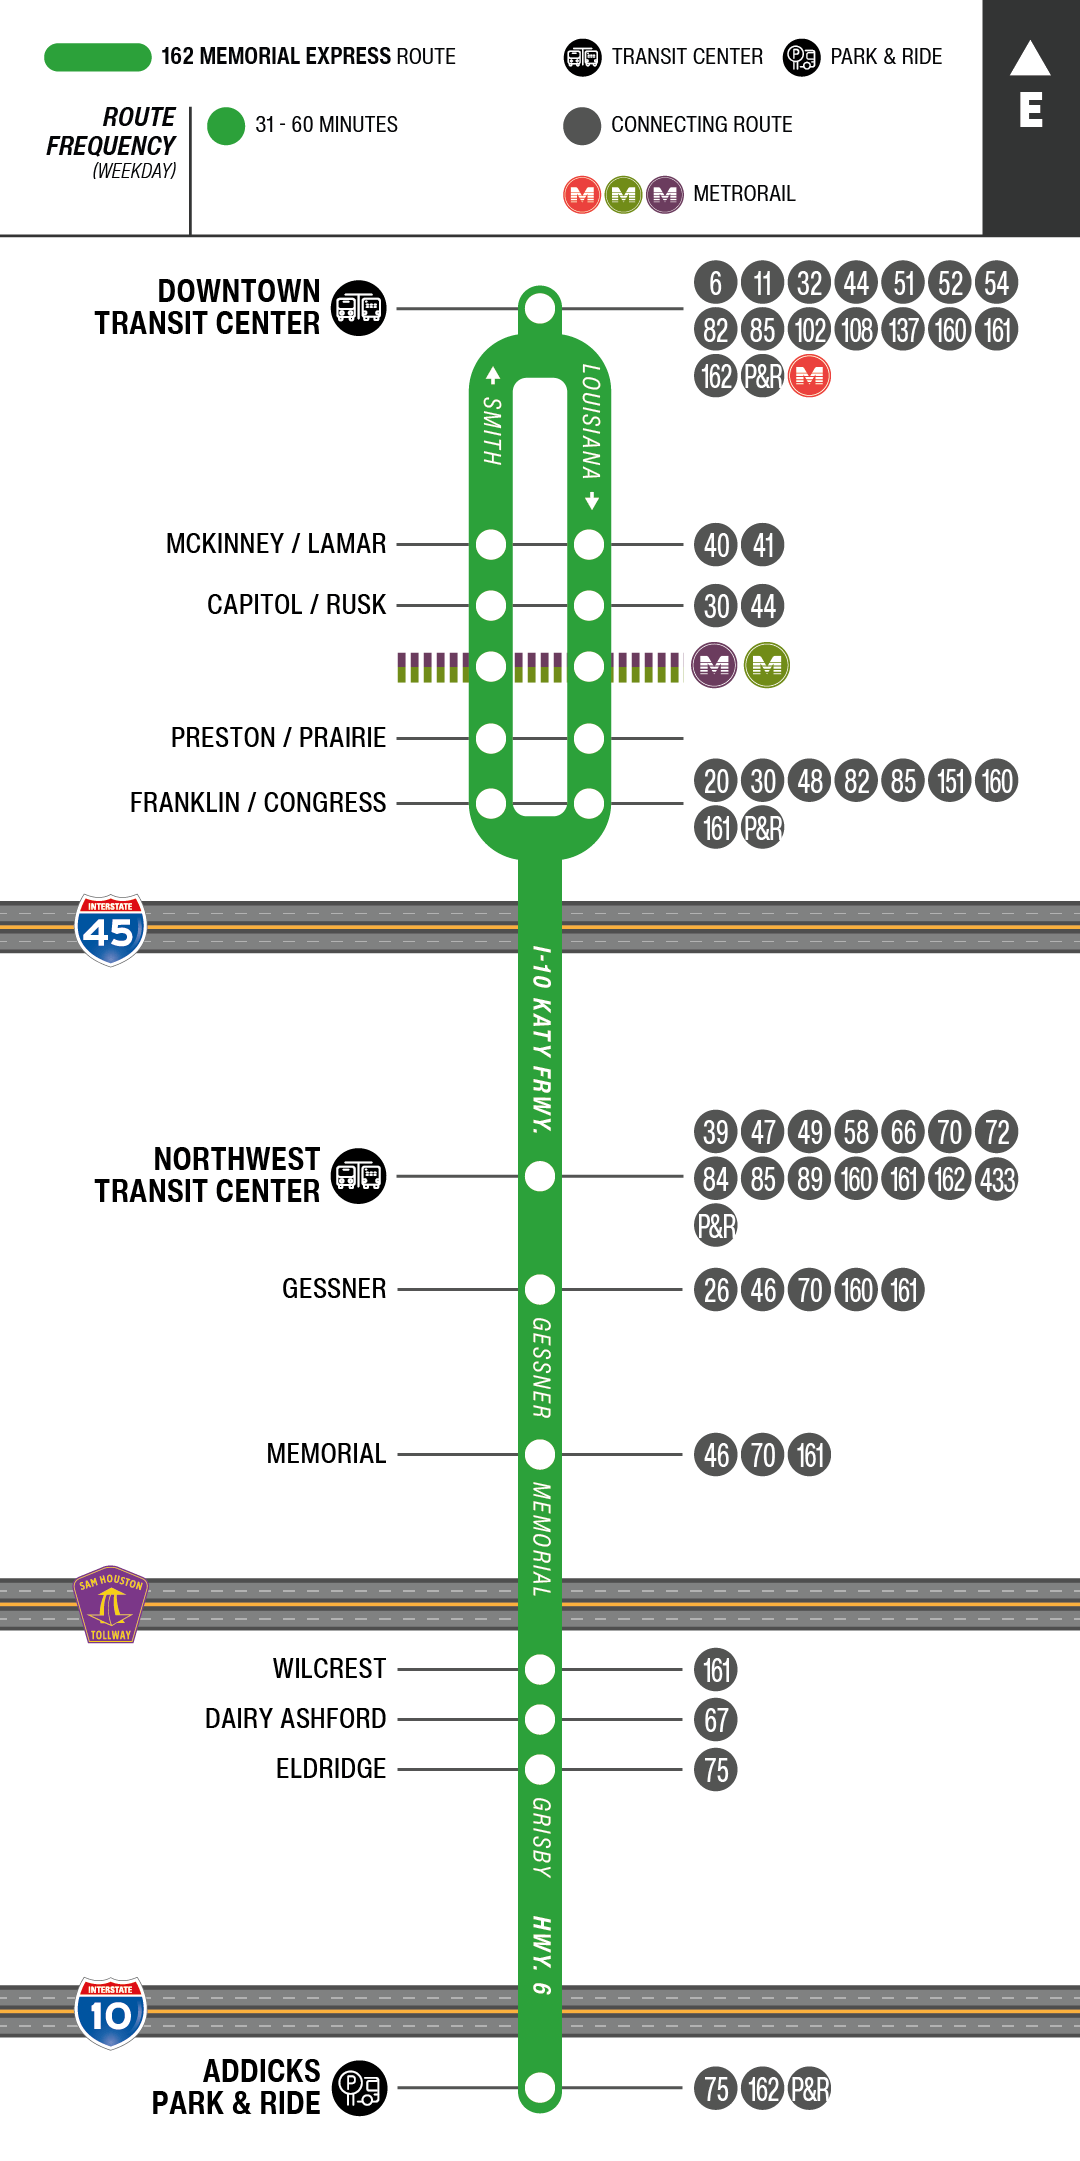 Route map for 162 Memorial Express bus